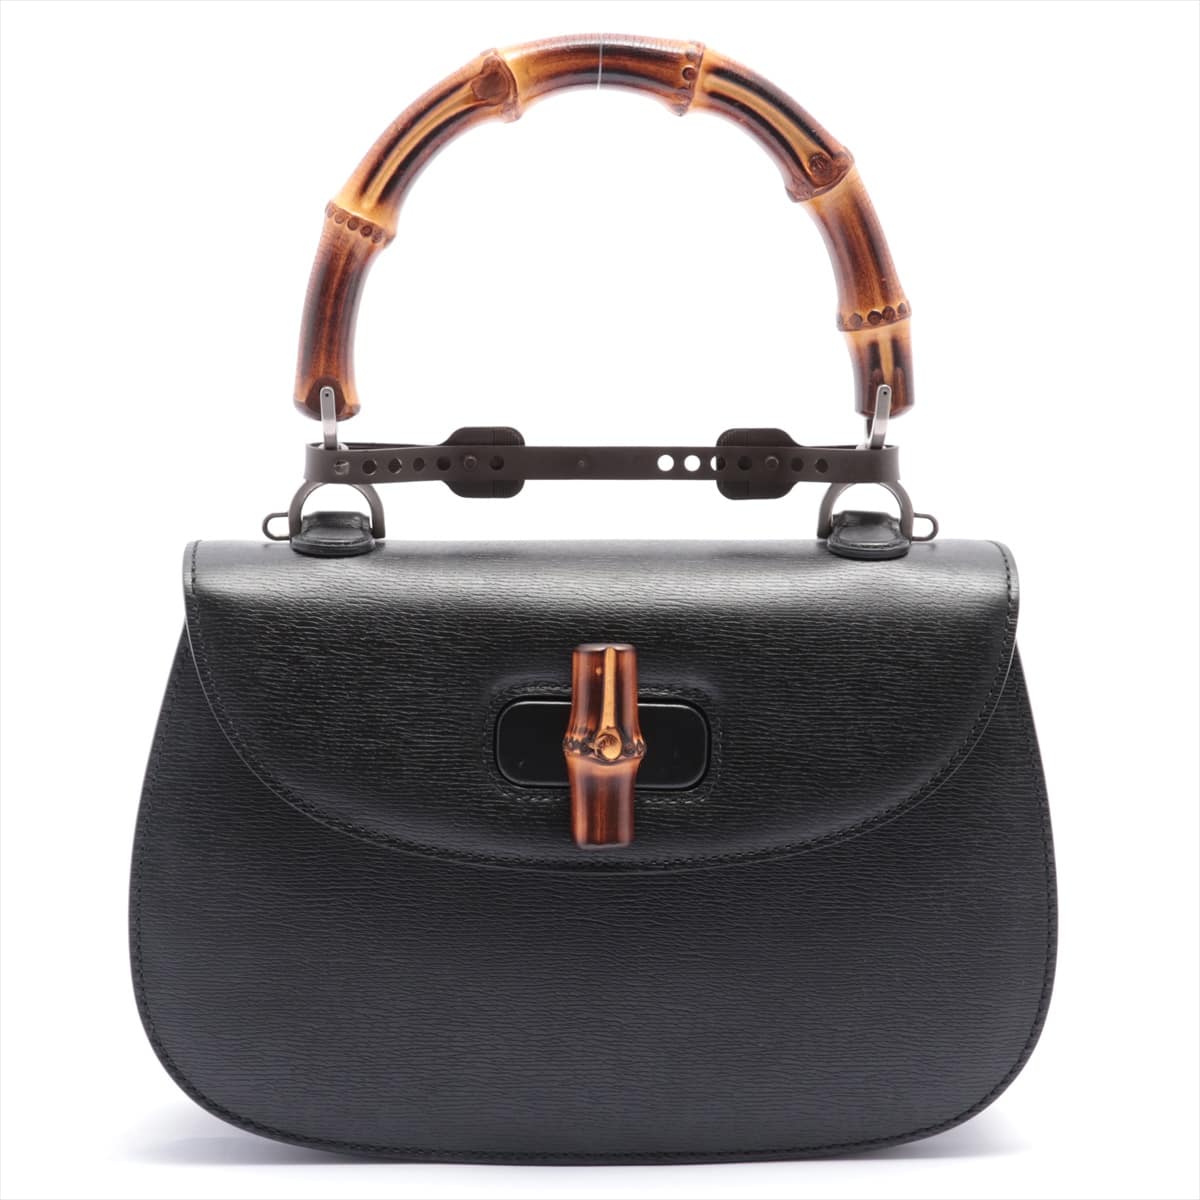 Gucci Bamboo Classic Leather 2way shoulder bag Black 409398